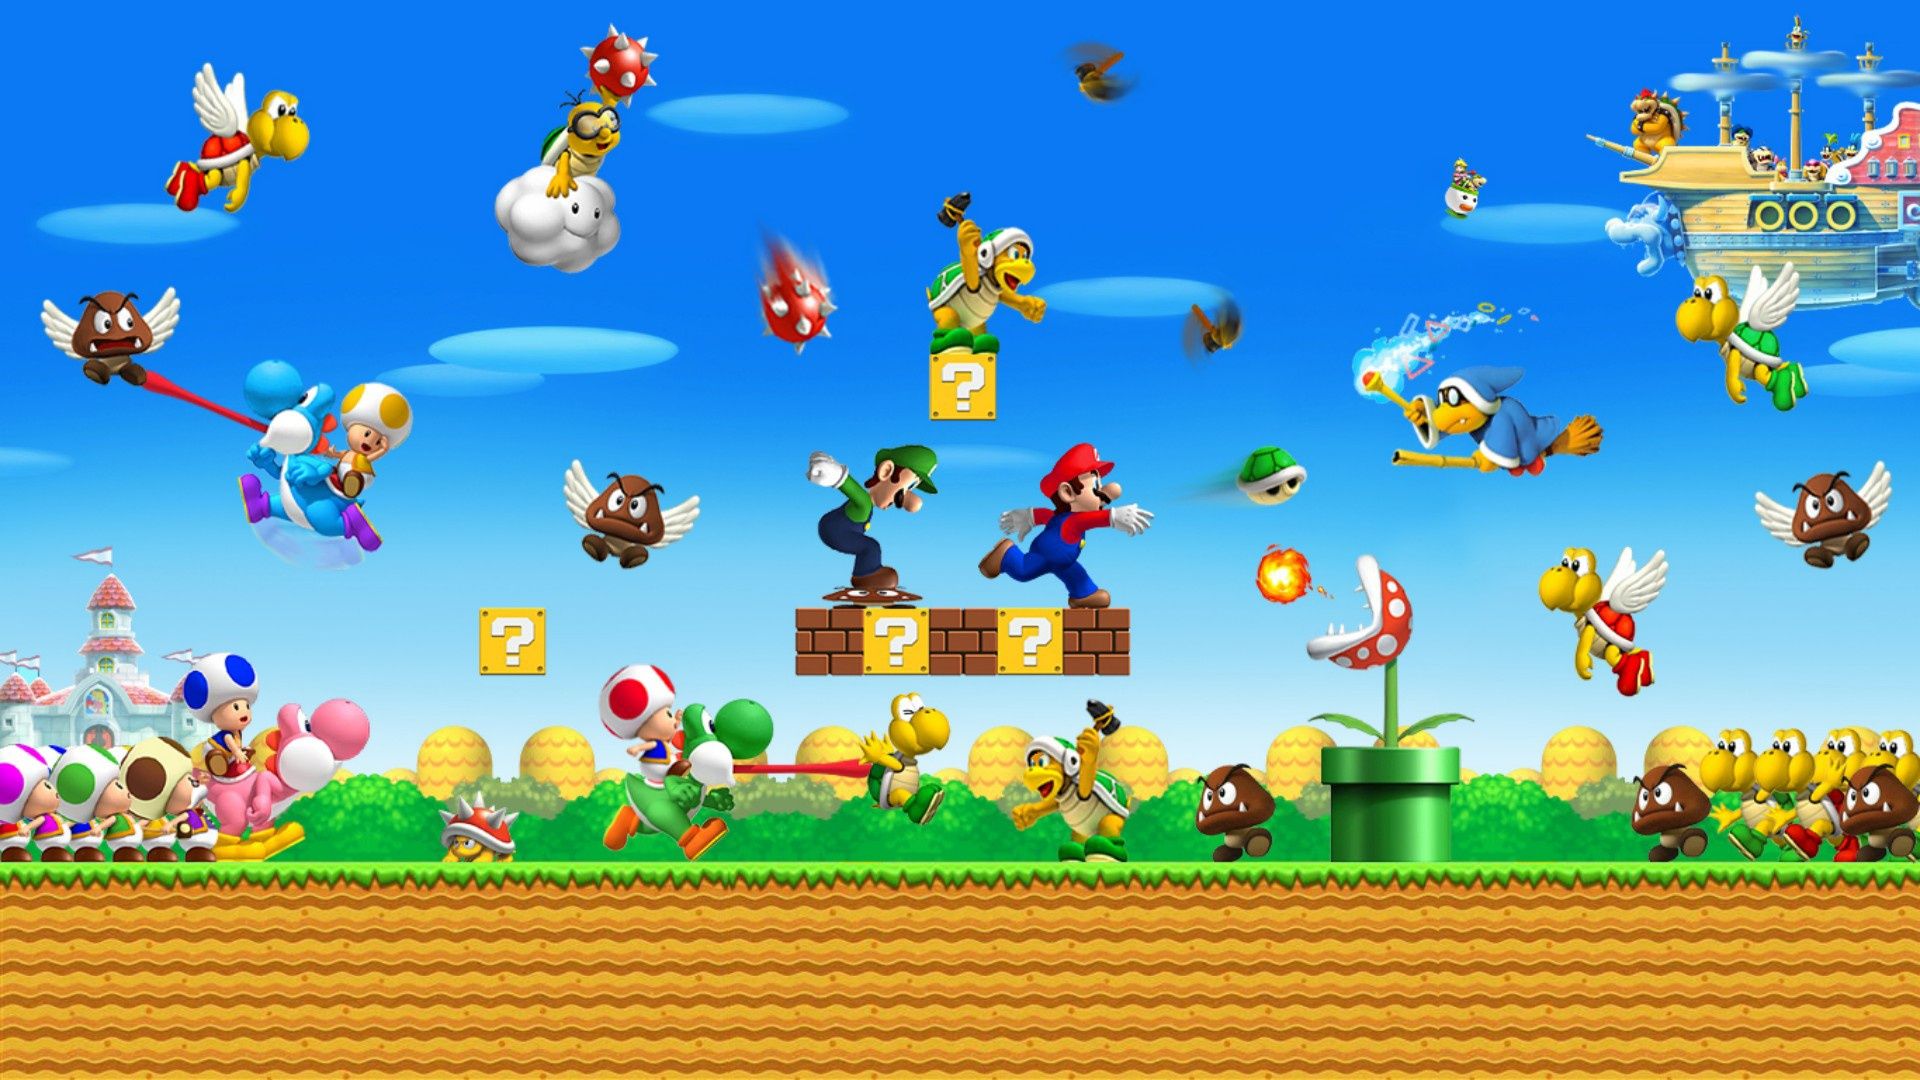 world of super mario | wallpapers55.com - Best Wallpapers for PCs ...